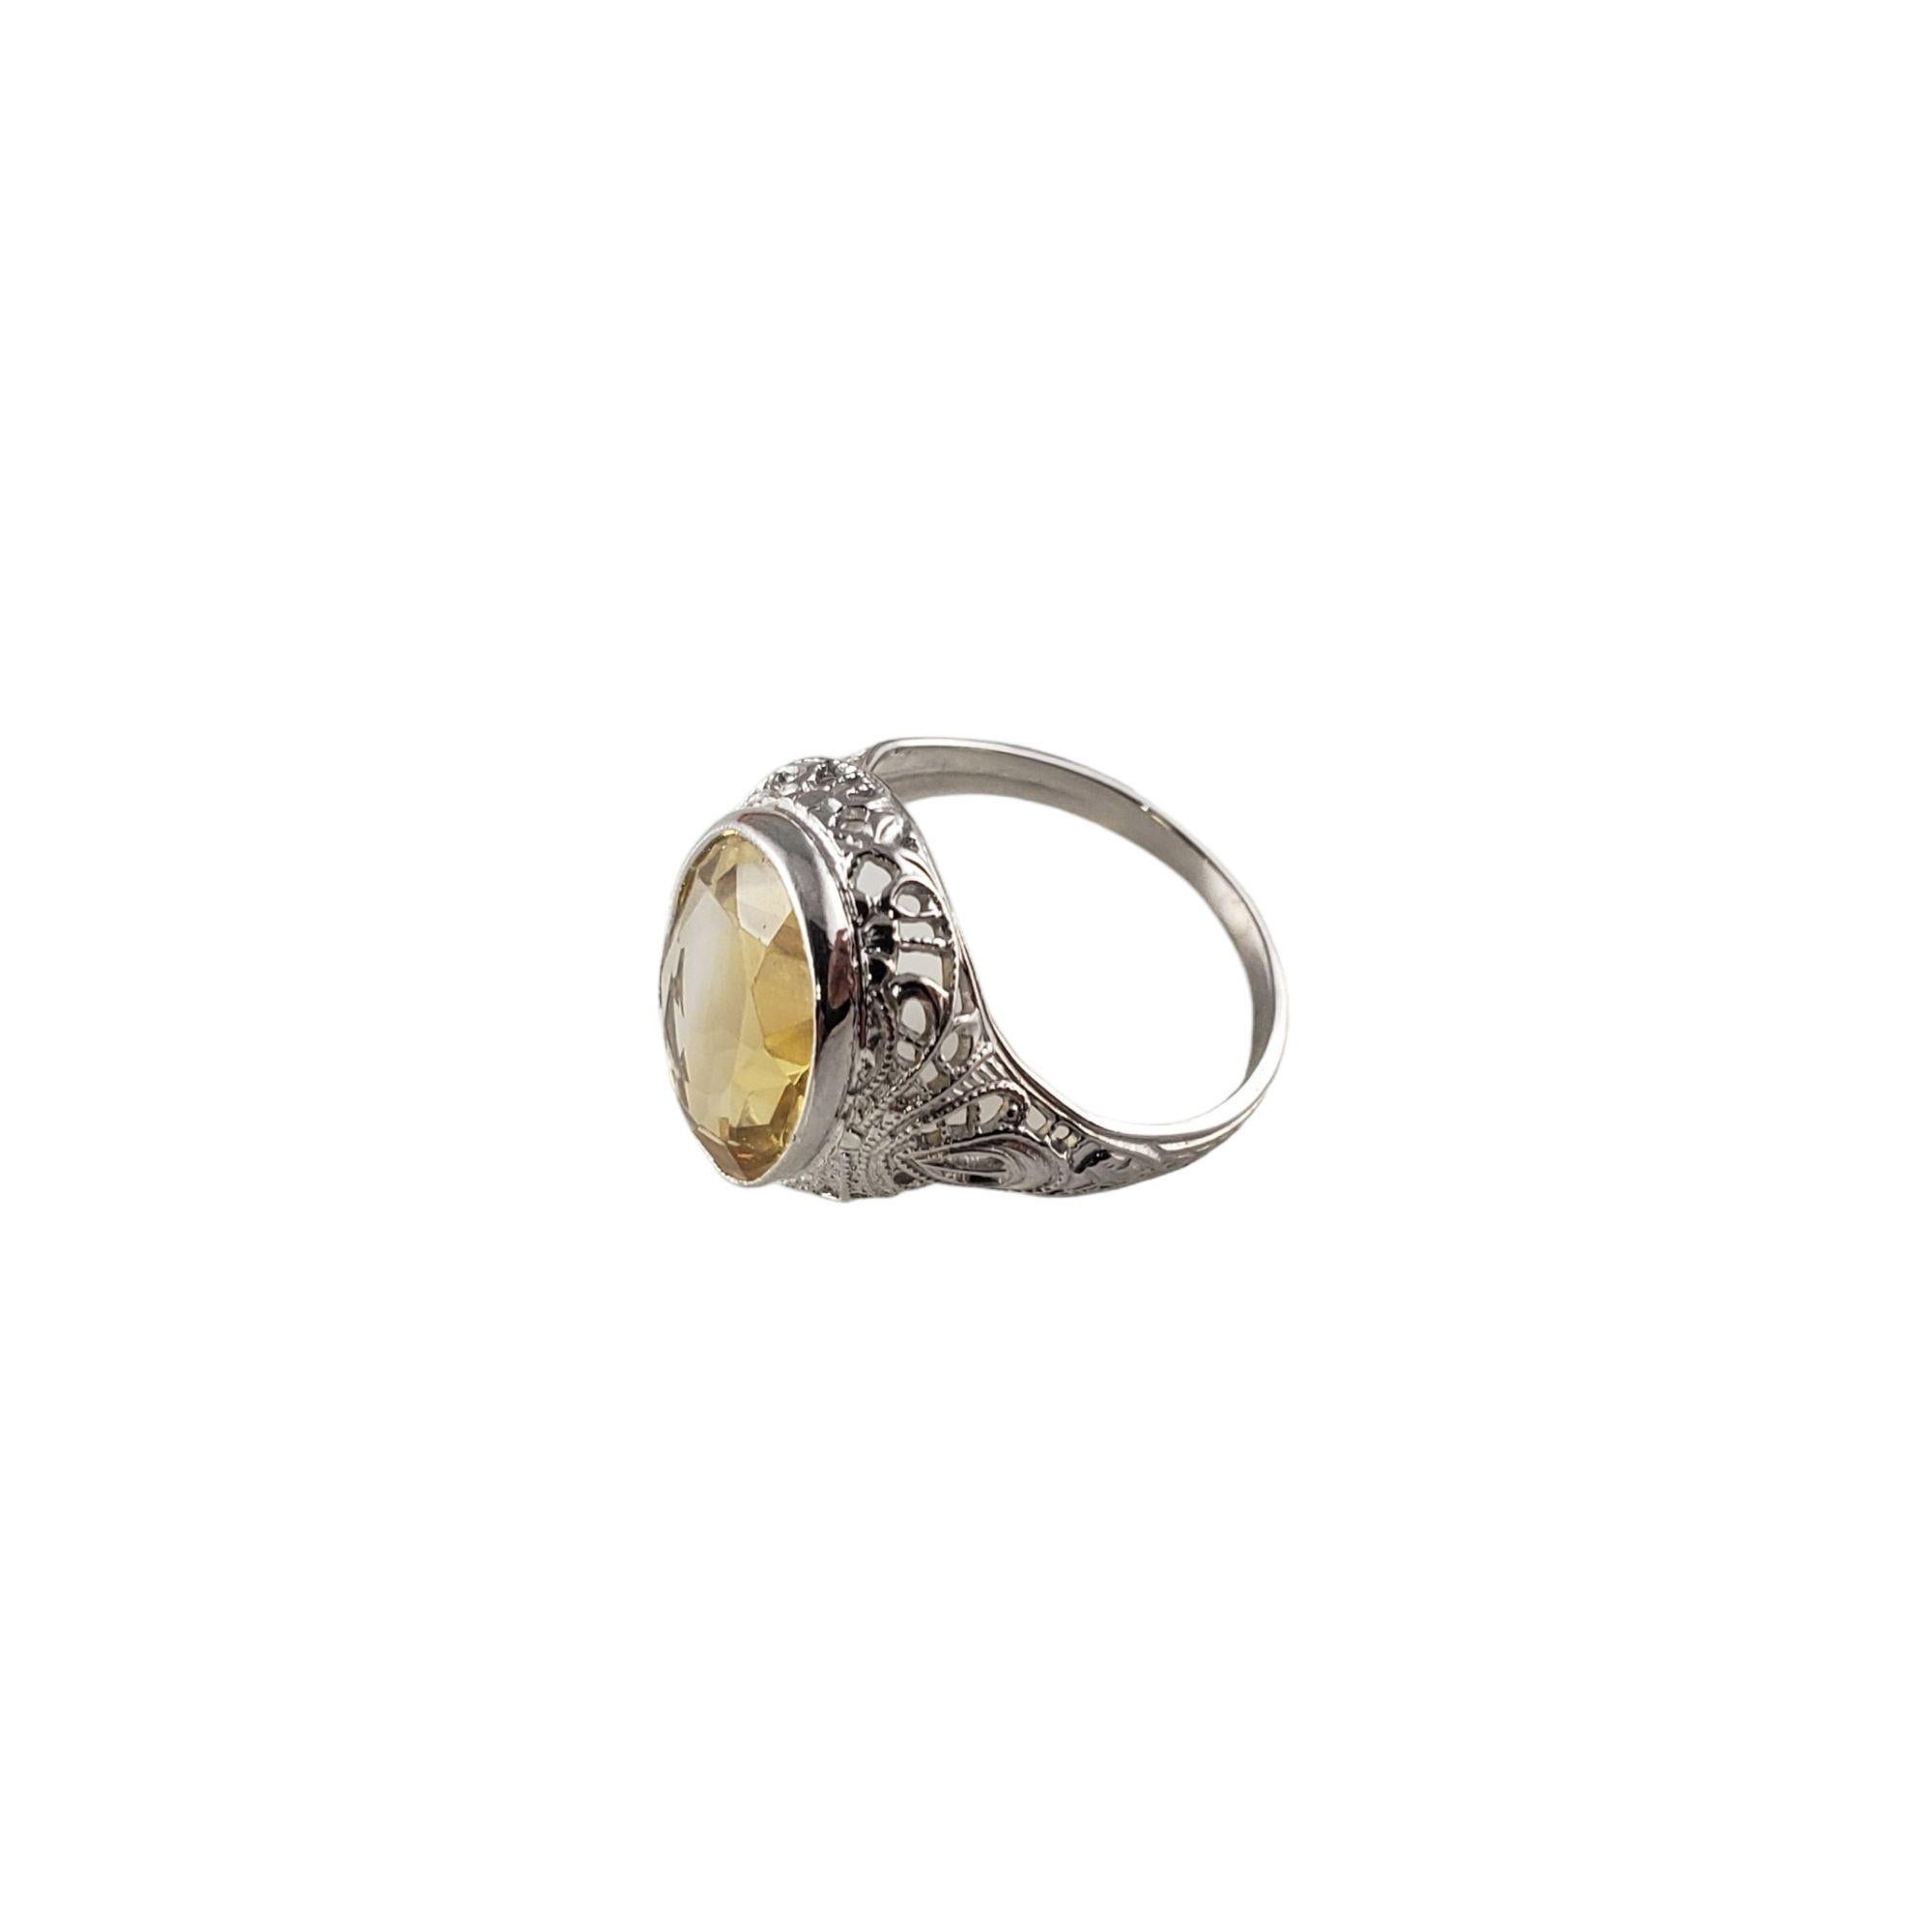 Vintage 10 Karat White Gold and Citrine Ring Size 3.5-

This lovely ring features one oval cut citrine (11.4 mm x 9.5 mm) set in beautifully detailed 10K white gold. Width: 14 mm.

Topaz weight: 3.06 ct.

Ring Size: 3.5

Weight: 2.4 g./ 1.5